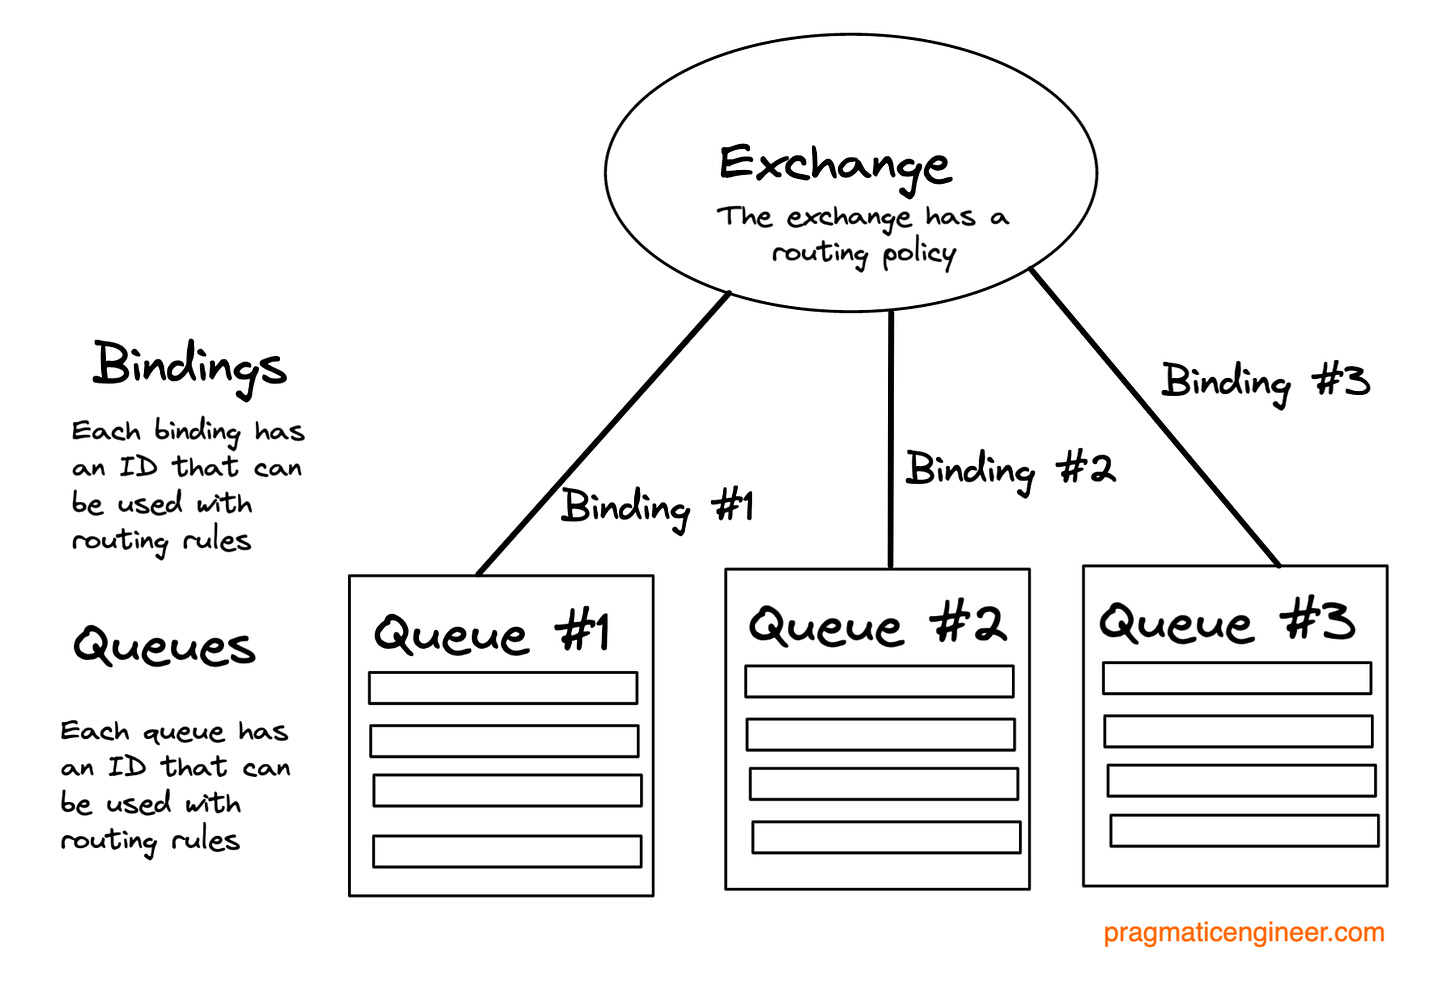 How exchanges, bindings, queues and routing policies are connected in RabbitMQ